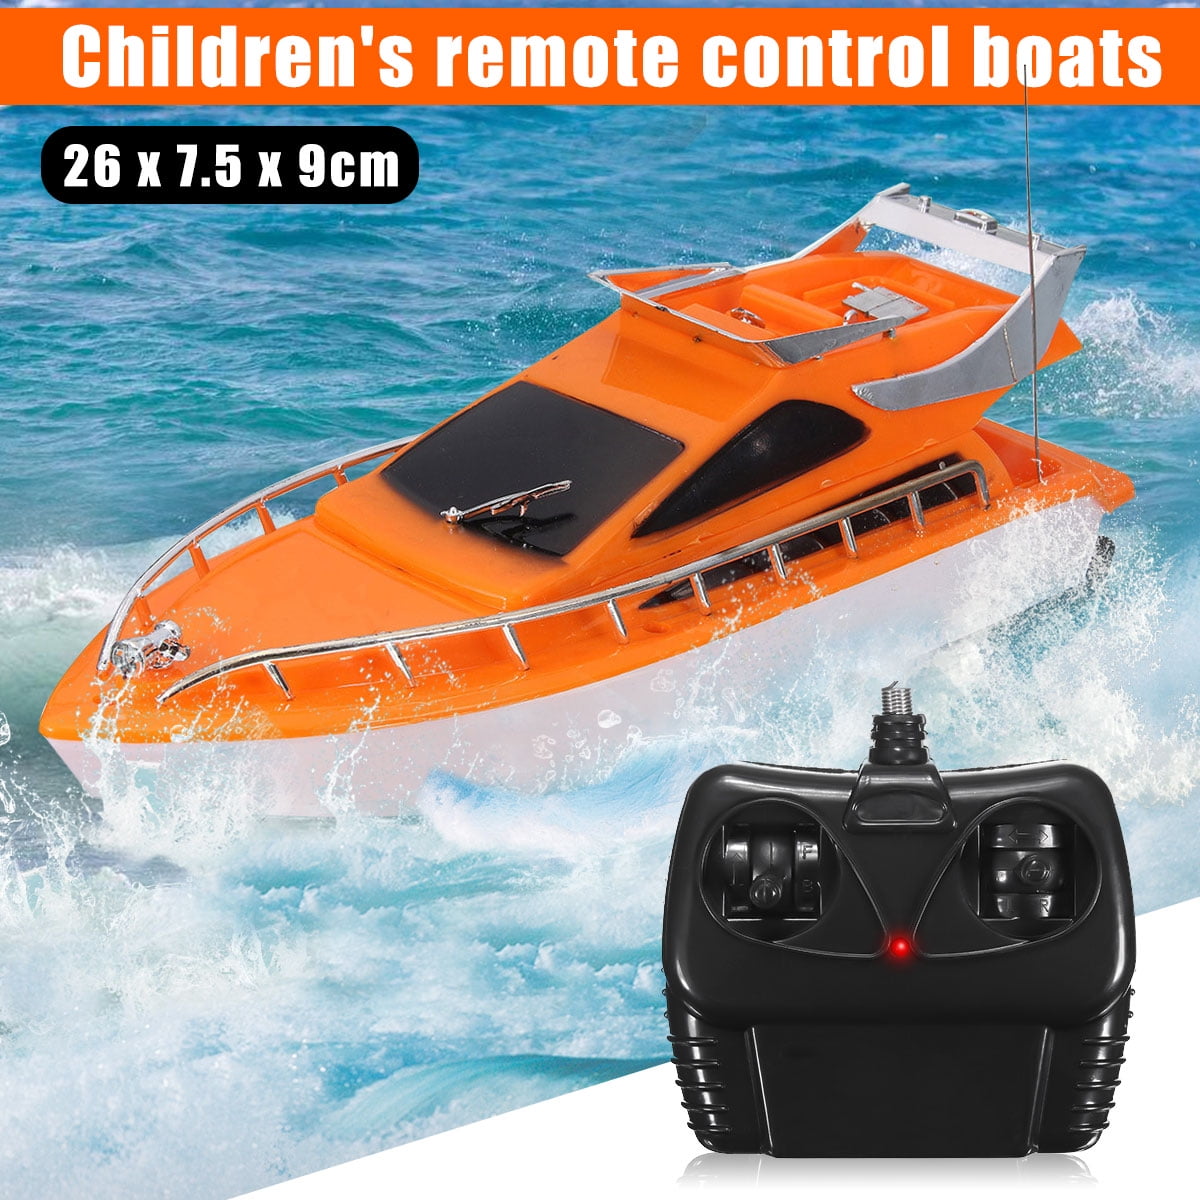 Remote Control Boat for Kids Adults,Electric Remote Control Boat Mini High Speed Remote Control Boat Race Boat for Sea,Pool,Pond,Outdoor Adventure,26x7.5x9cm